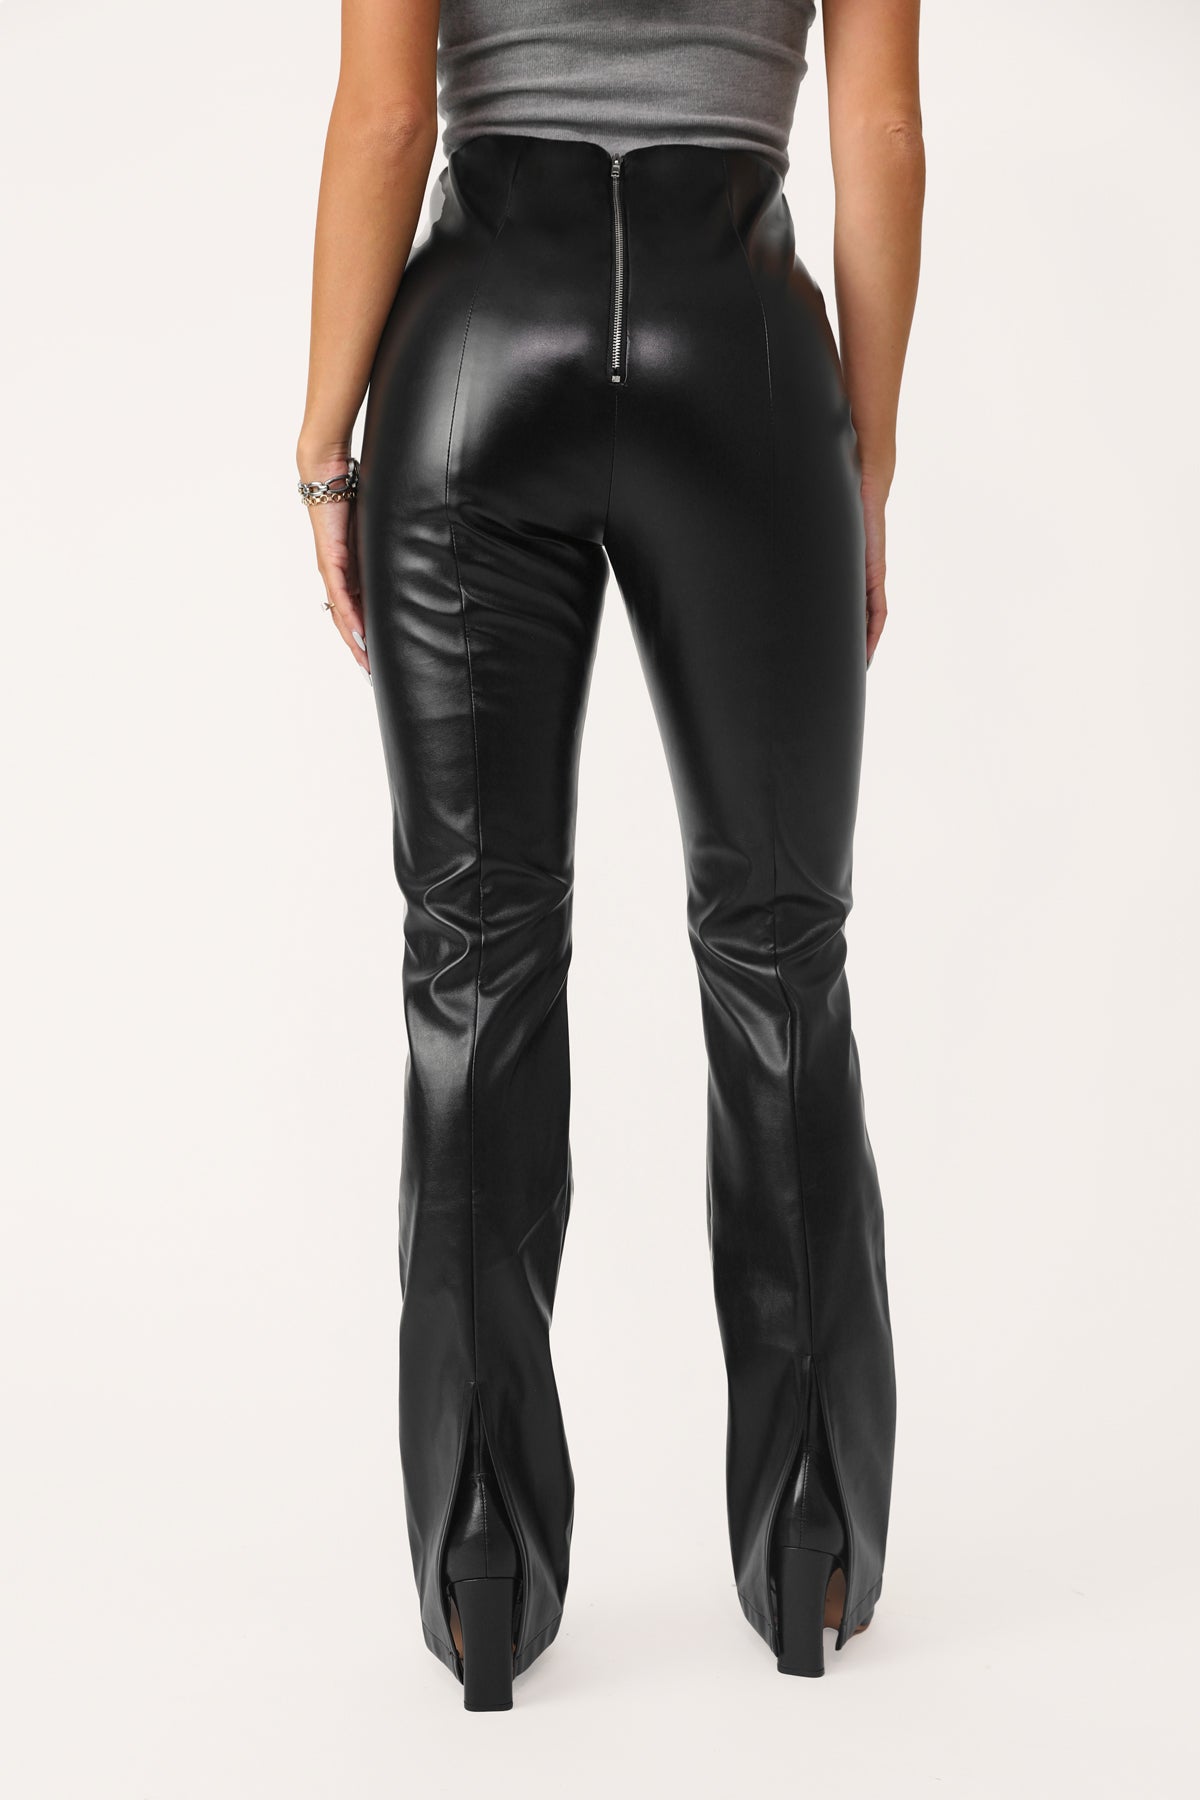 These $23 Faux Leather Pants are a Must-Have